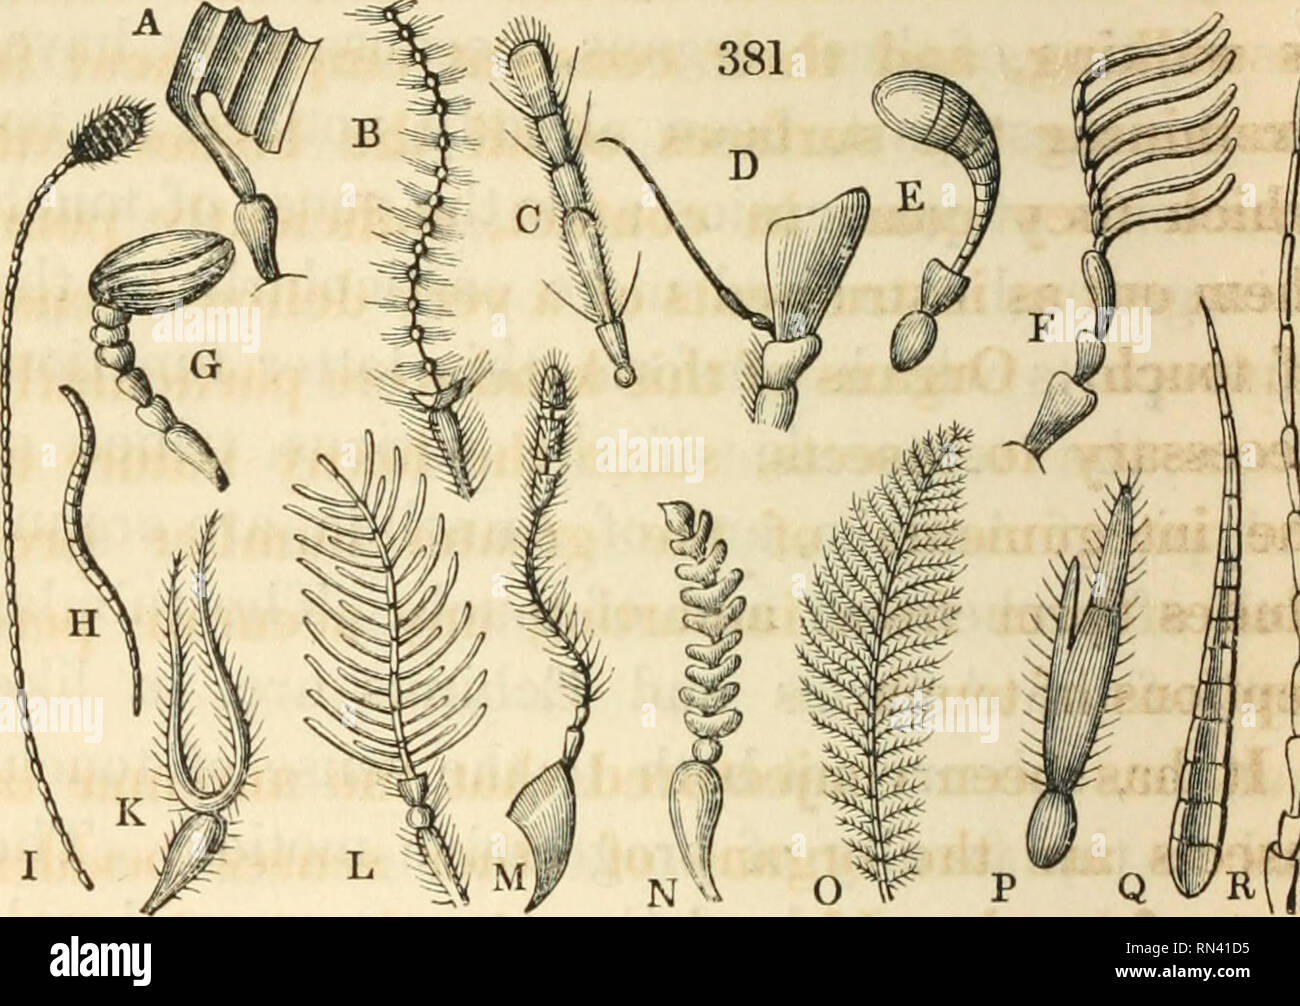 . Animal and vegetable physiology, considered with reference to natural theology, by Peter Mark Roget ... Biology; Physiology; Plant physiology; Natural theology. .384 THE SENSORIAL FUNCTIONS. the antennae of insects may be obtained from the specimens delineated in Fig. 381, which shows a few of the most remarkable.*. * In this figure, A represents the form of antennae, technically denominated Antenna capitulo uncinato, as exemplified in the Pausus. B. is the A. piloso-verticillata, as in the Psychoda ocellaris. C.. A. biclavata, (Claviger longicornis). D. .A. triangularis, (Lophosia). E..A. c Stock Photo